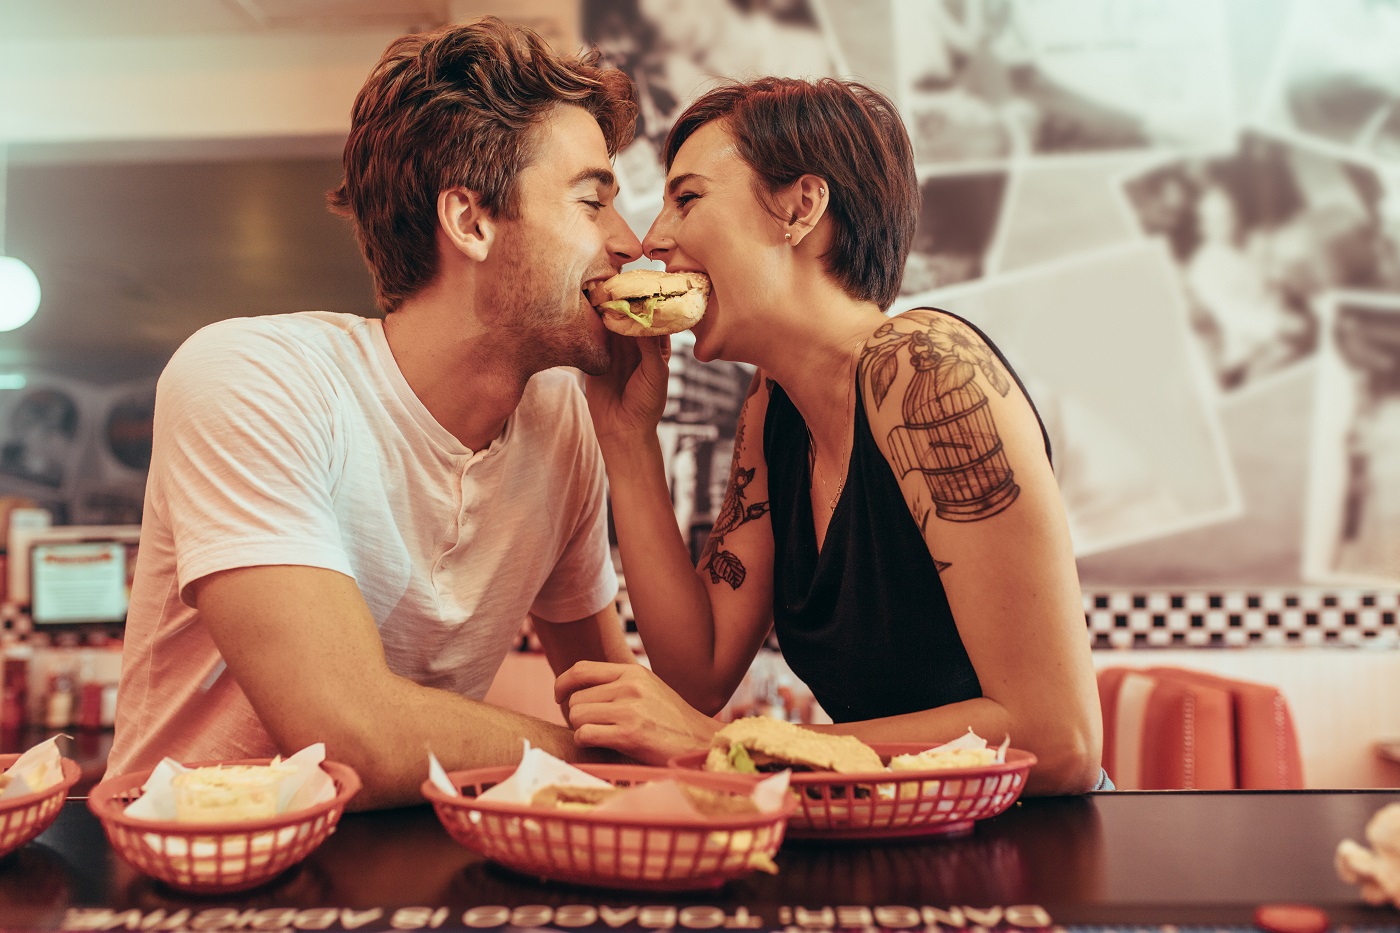 Happy couple at a restaurant eating a burger together looking at each other. Man and woman sitting in a diner with food on the table sharing a burger. - codul bunelor maniere la date